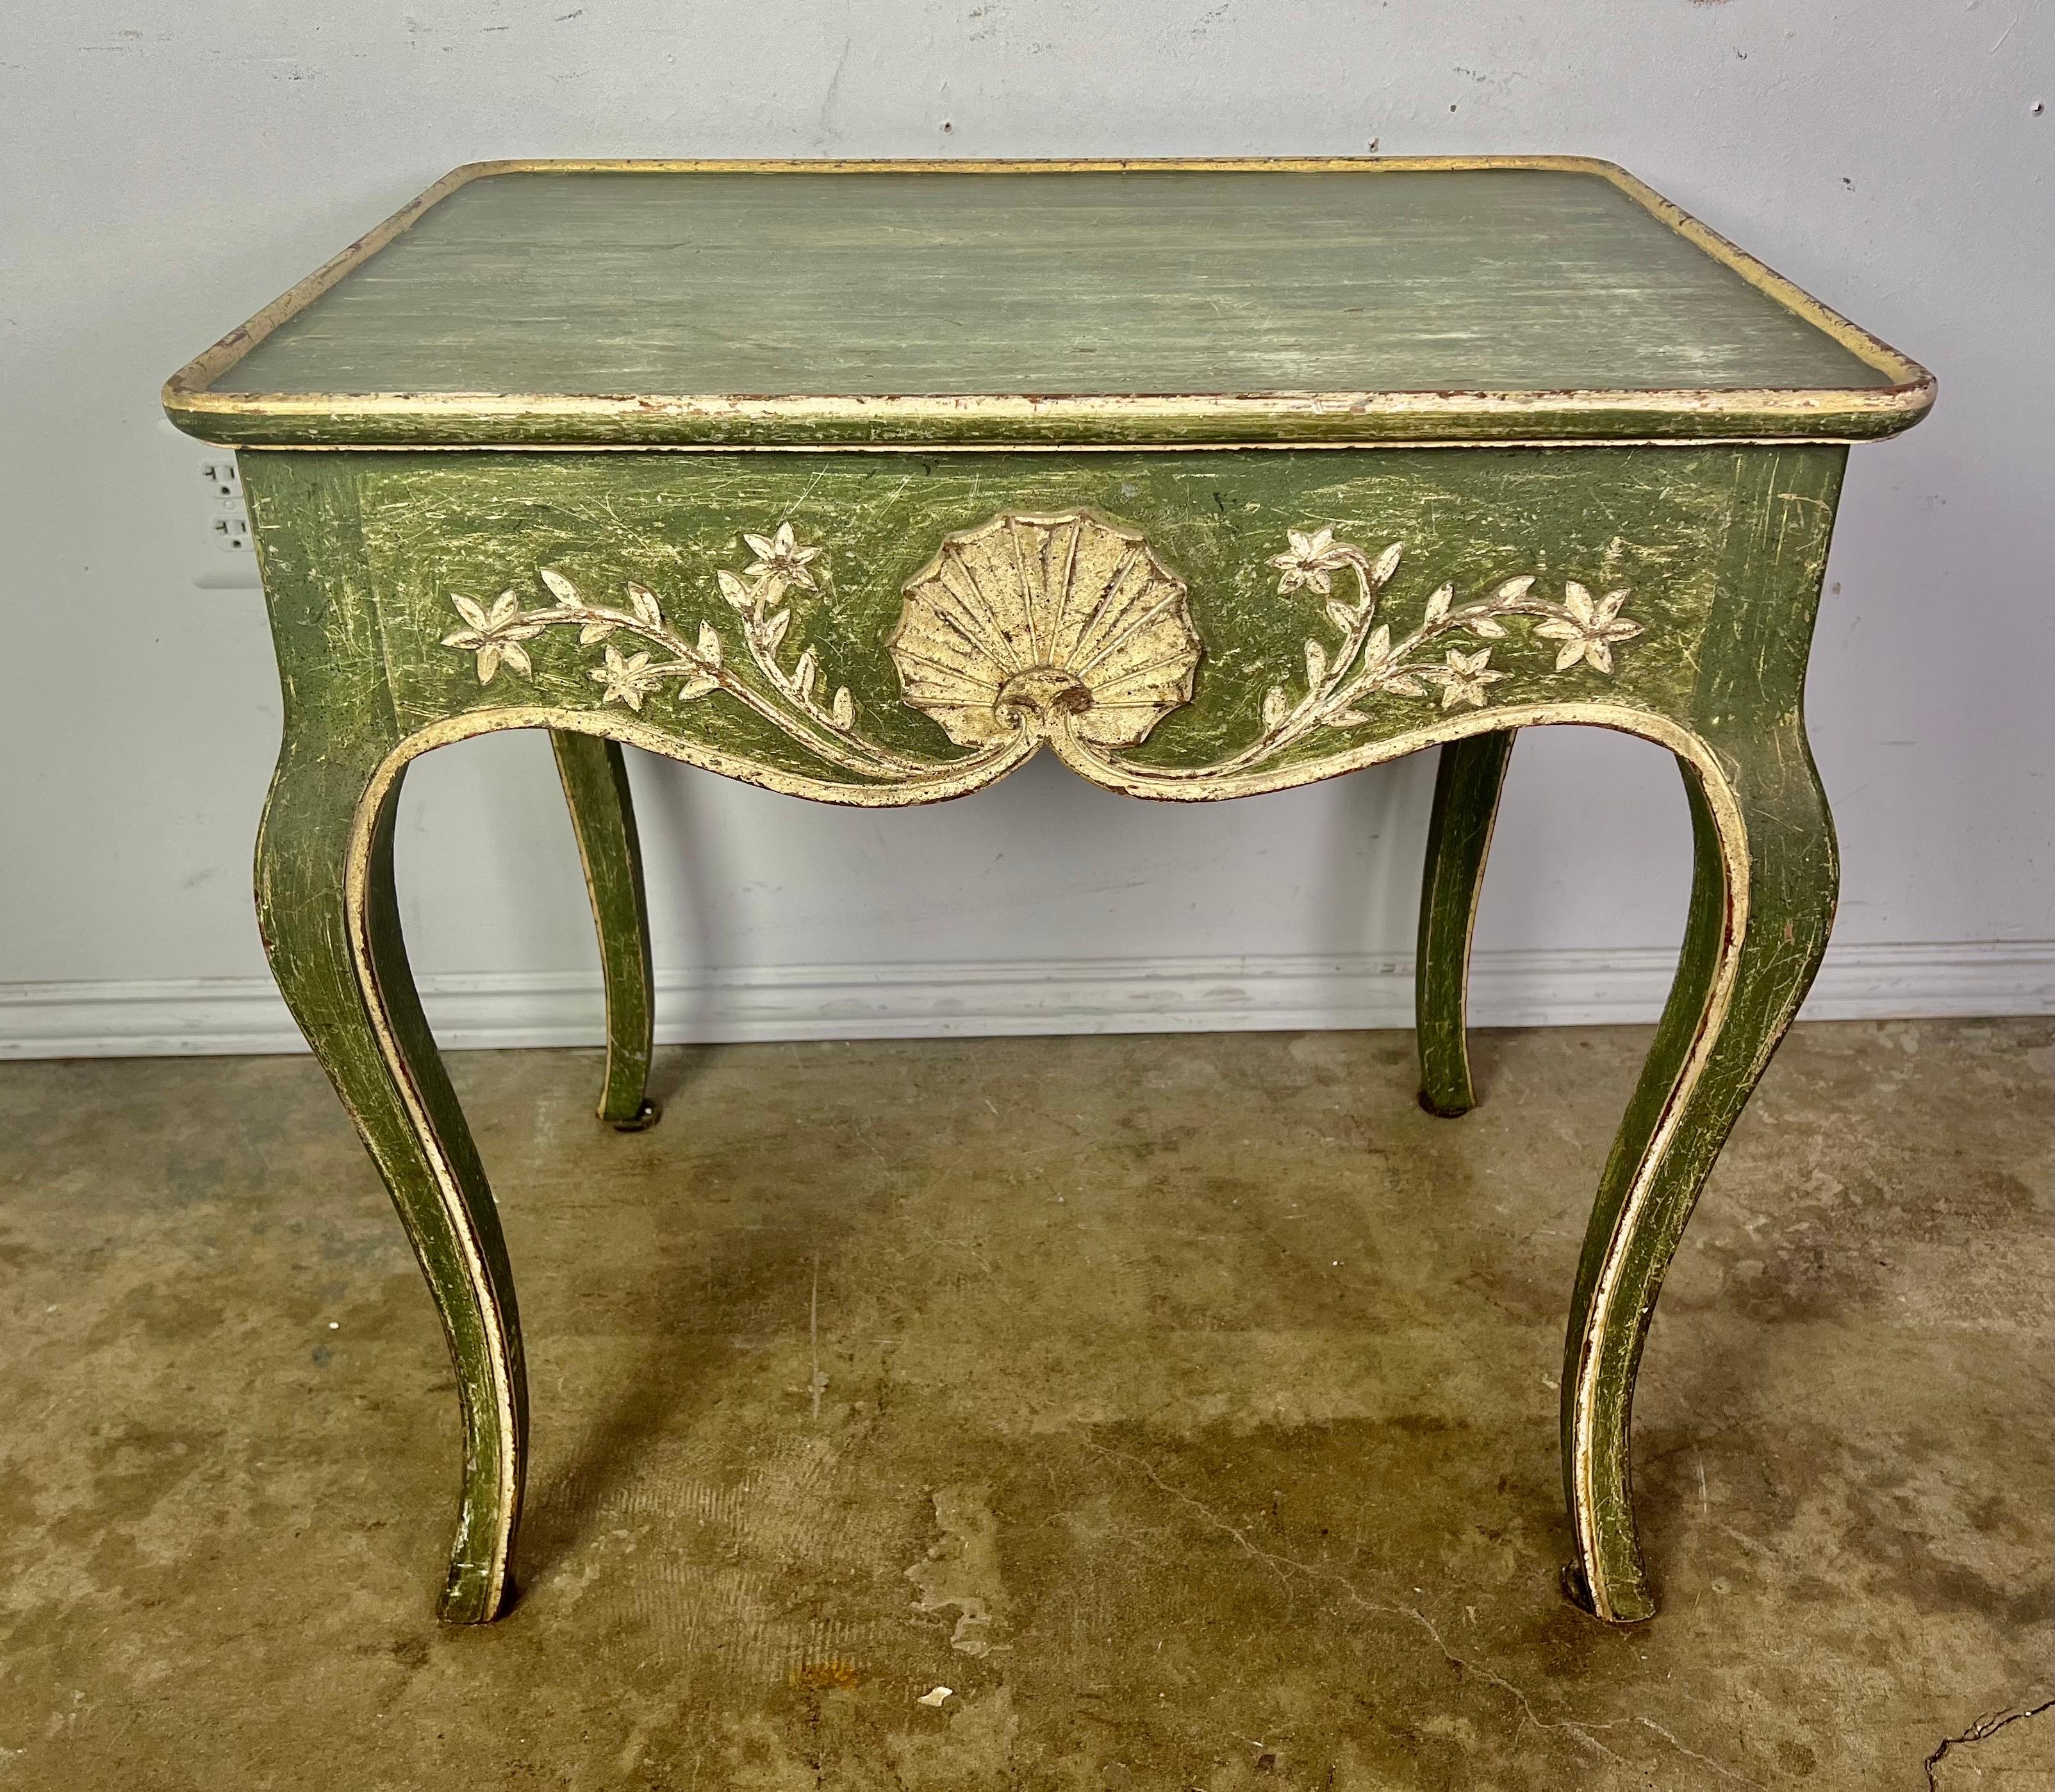 Early 20th century green painted side table with single drawer on the side. The table is beautifully decorated with a center shell design flanked by scrolled flowers. The finish is worn to perfection. The table stands on four cabriole legs that end